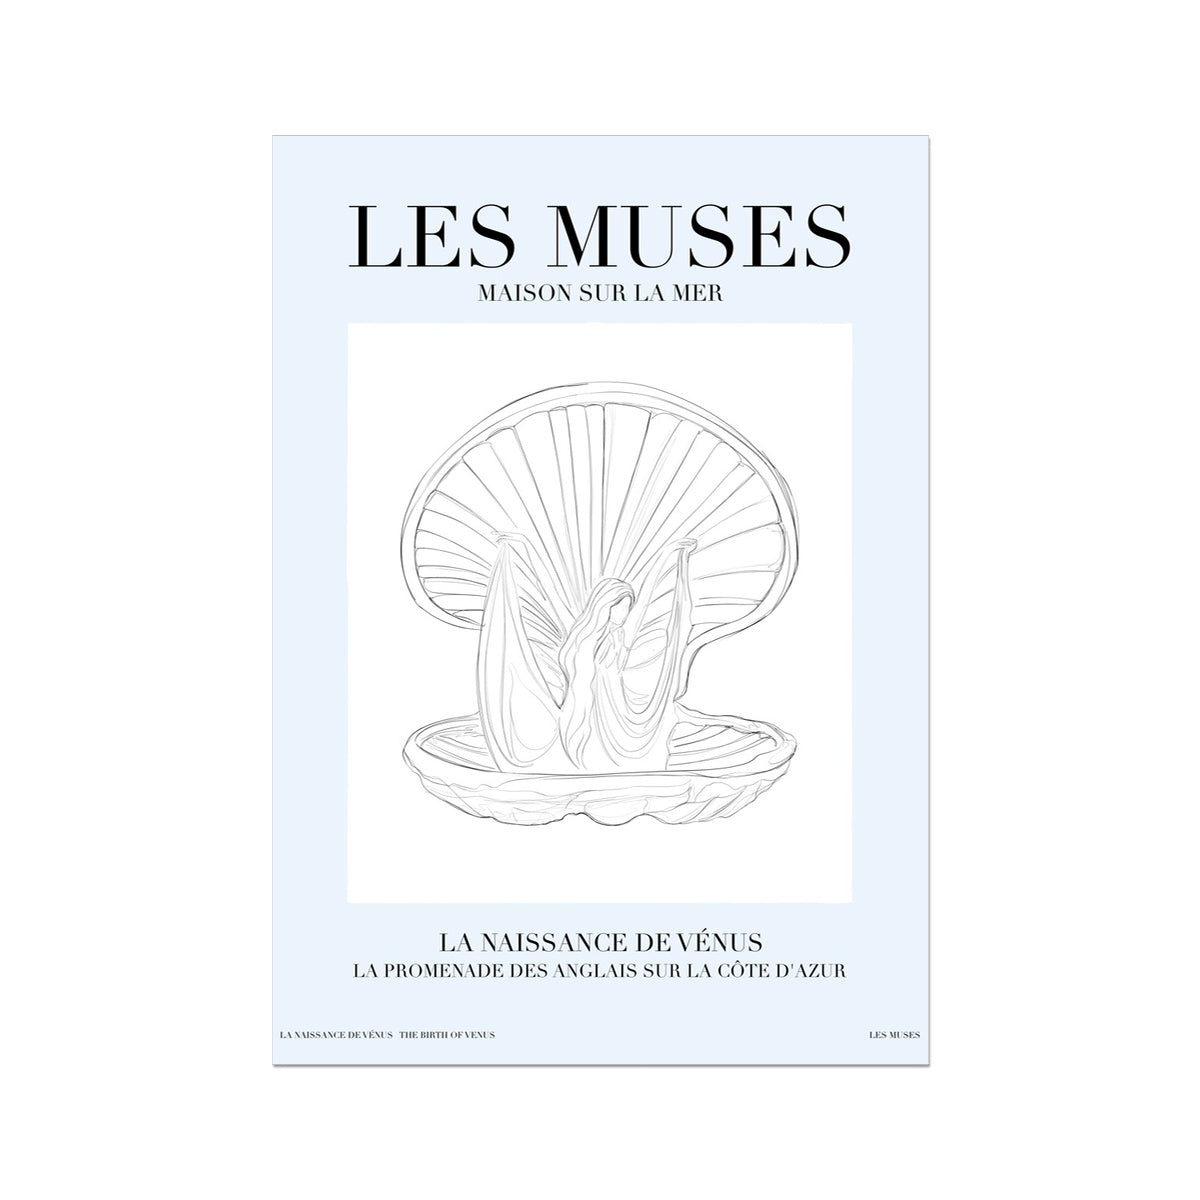 © les muses / Les Muses is a dreamy wall art collection of line art drawings and paintings.
Select among illustrations of greek goddesses, seashells, cherubs and muses. 